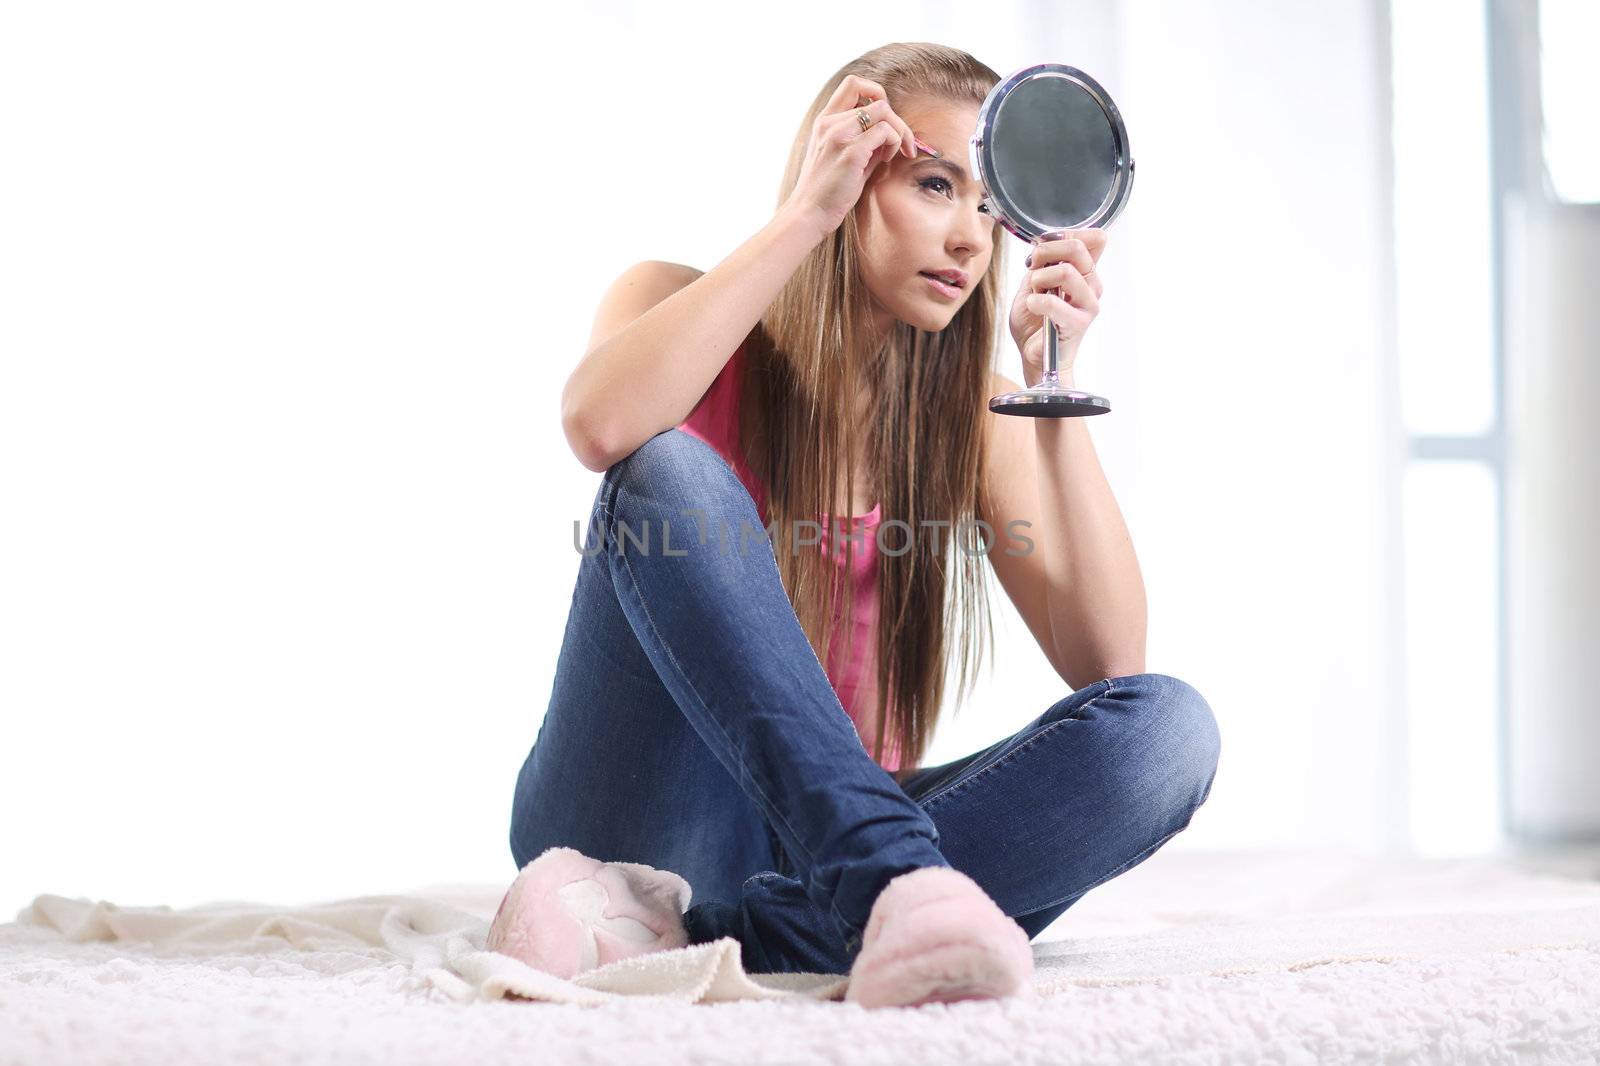 Young long-haired blonde girl sitting on the bed and she pulls out her eyebrows with tweezers and hold the mirror in her hand







Young long-haired blonde sitting on the bed and looks at the mirror